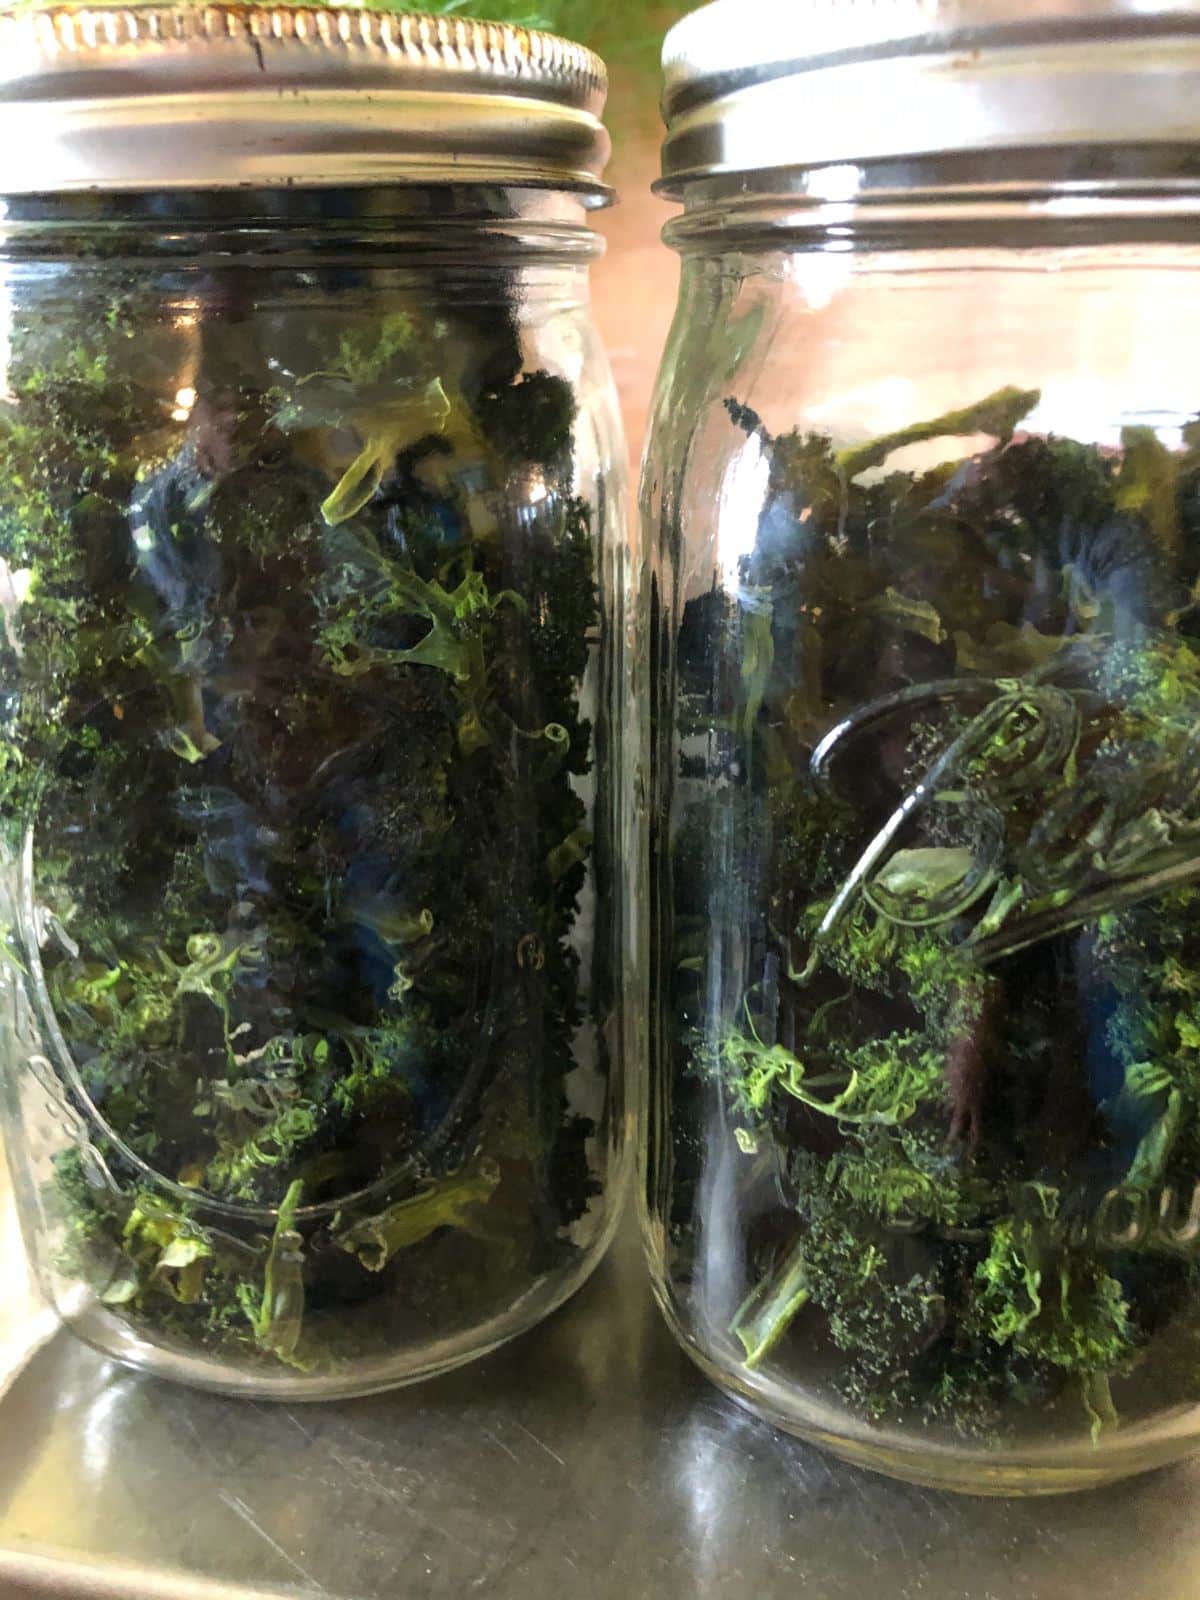 Dried broccoli stored in canning jars